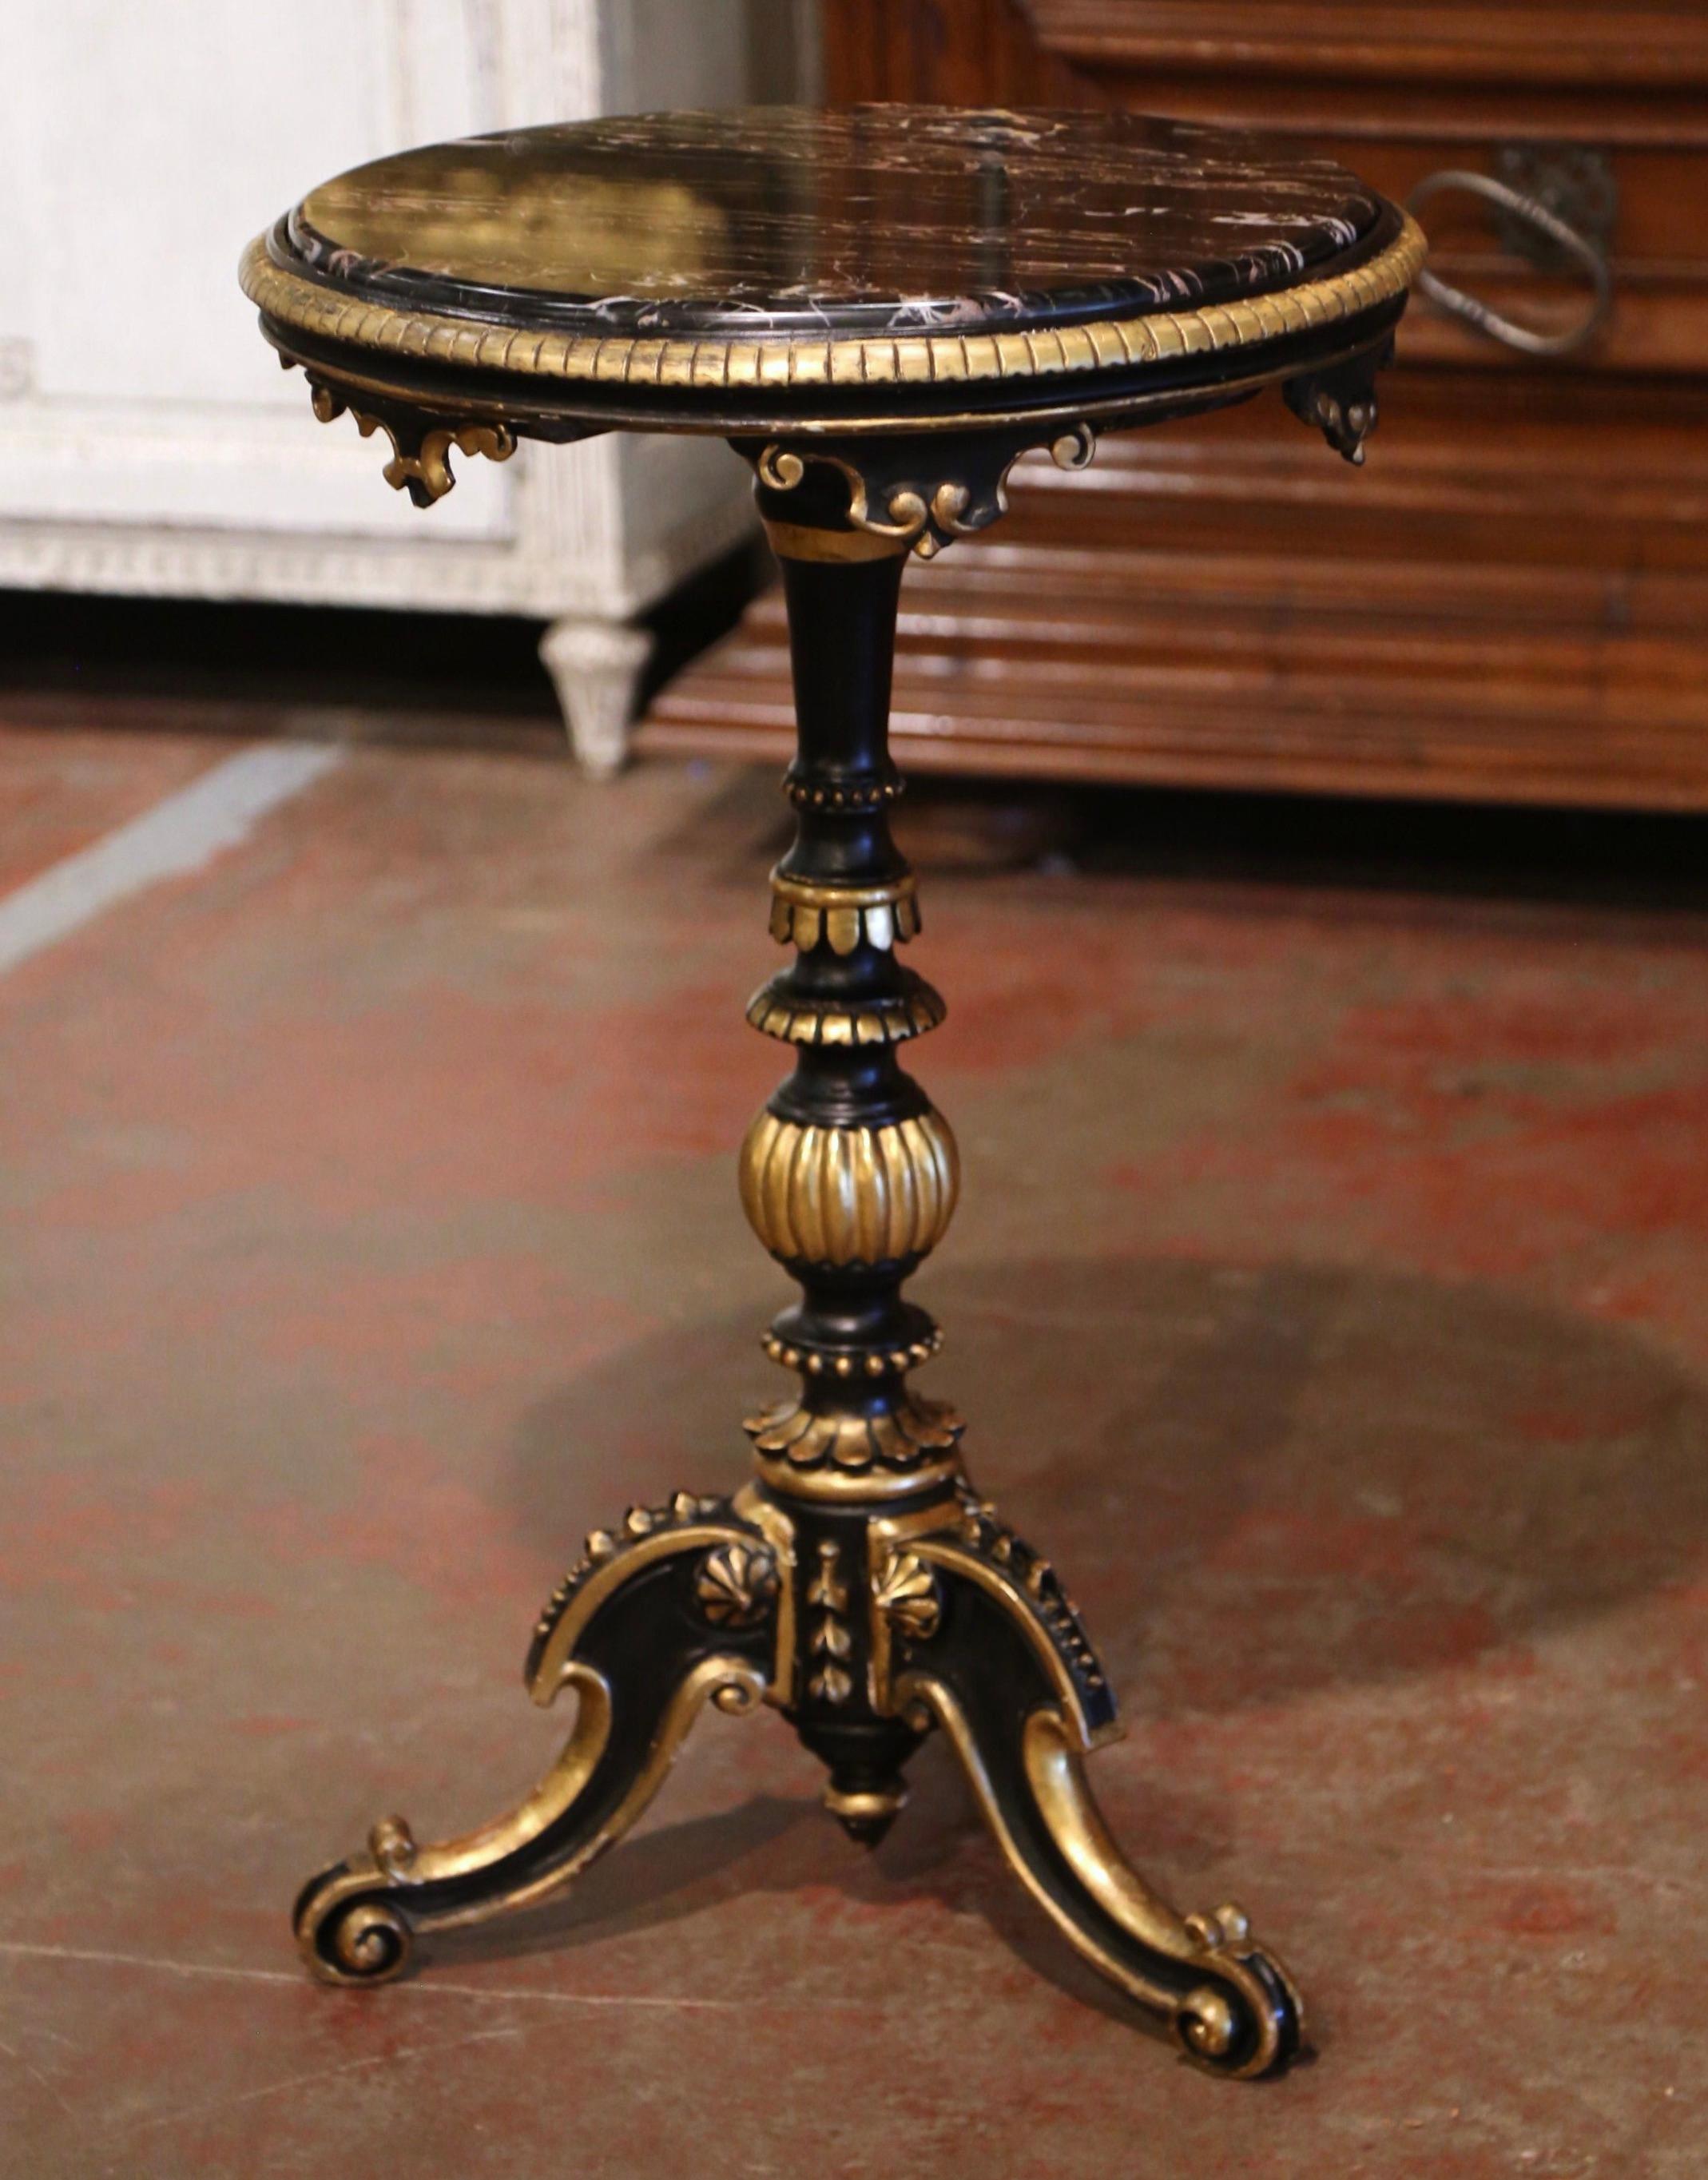 Crafted in Florence, Italy, circa 1860, this elegant antique table stands on a carved and turned pedestal base ending with three legs and escargot feet, decorated with floral gilt motifs. The surface is dressed with a circular inset black marble top